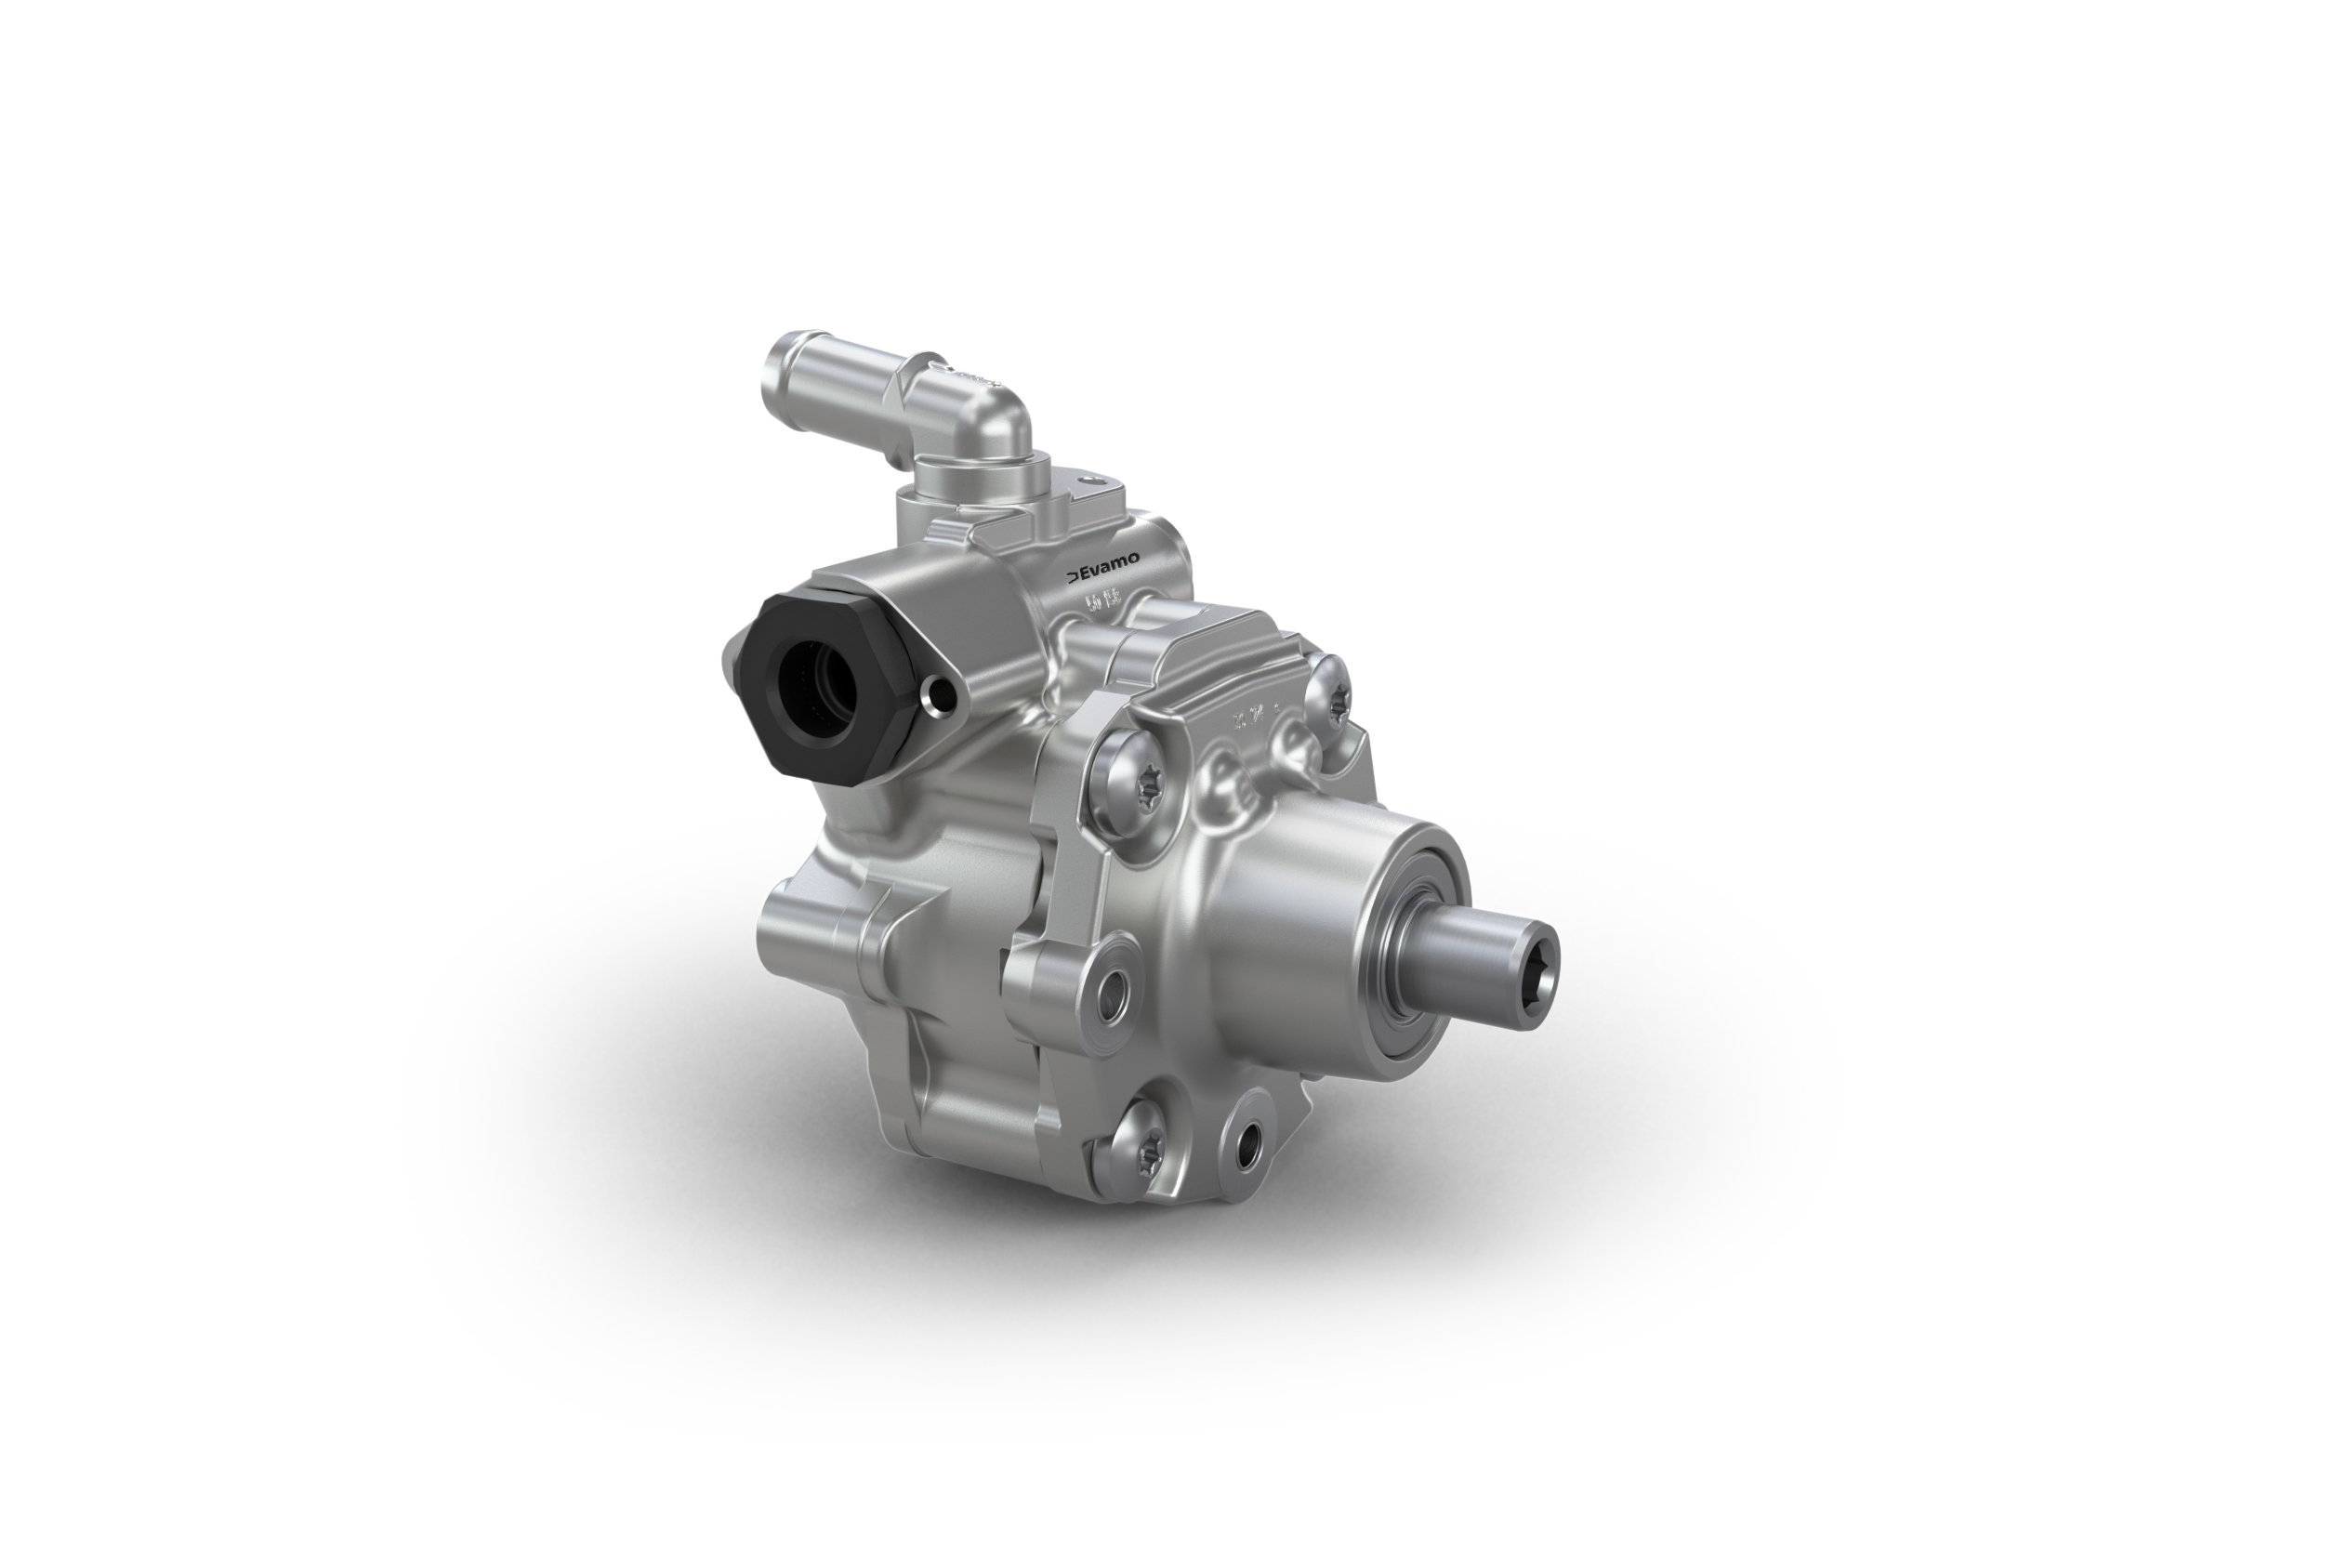 The energy-saving Varioserv power steering pump for passenger cars consists of a robust housing with a pressed-in suction connection and integrated volume flow control.